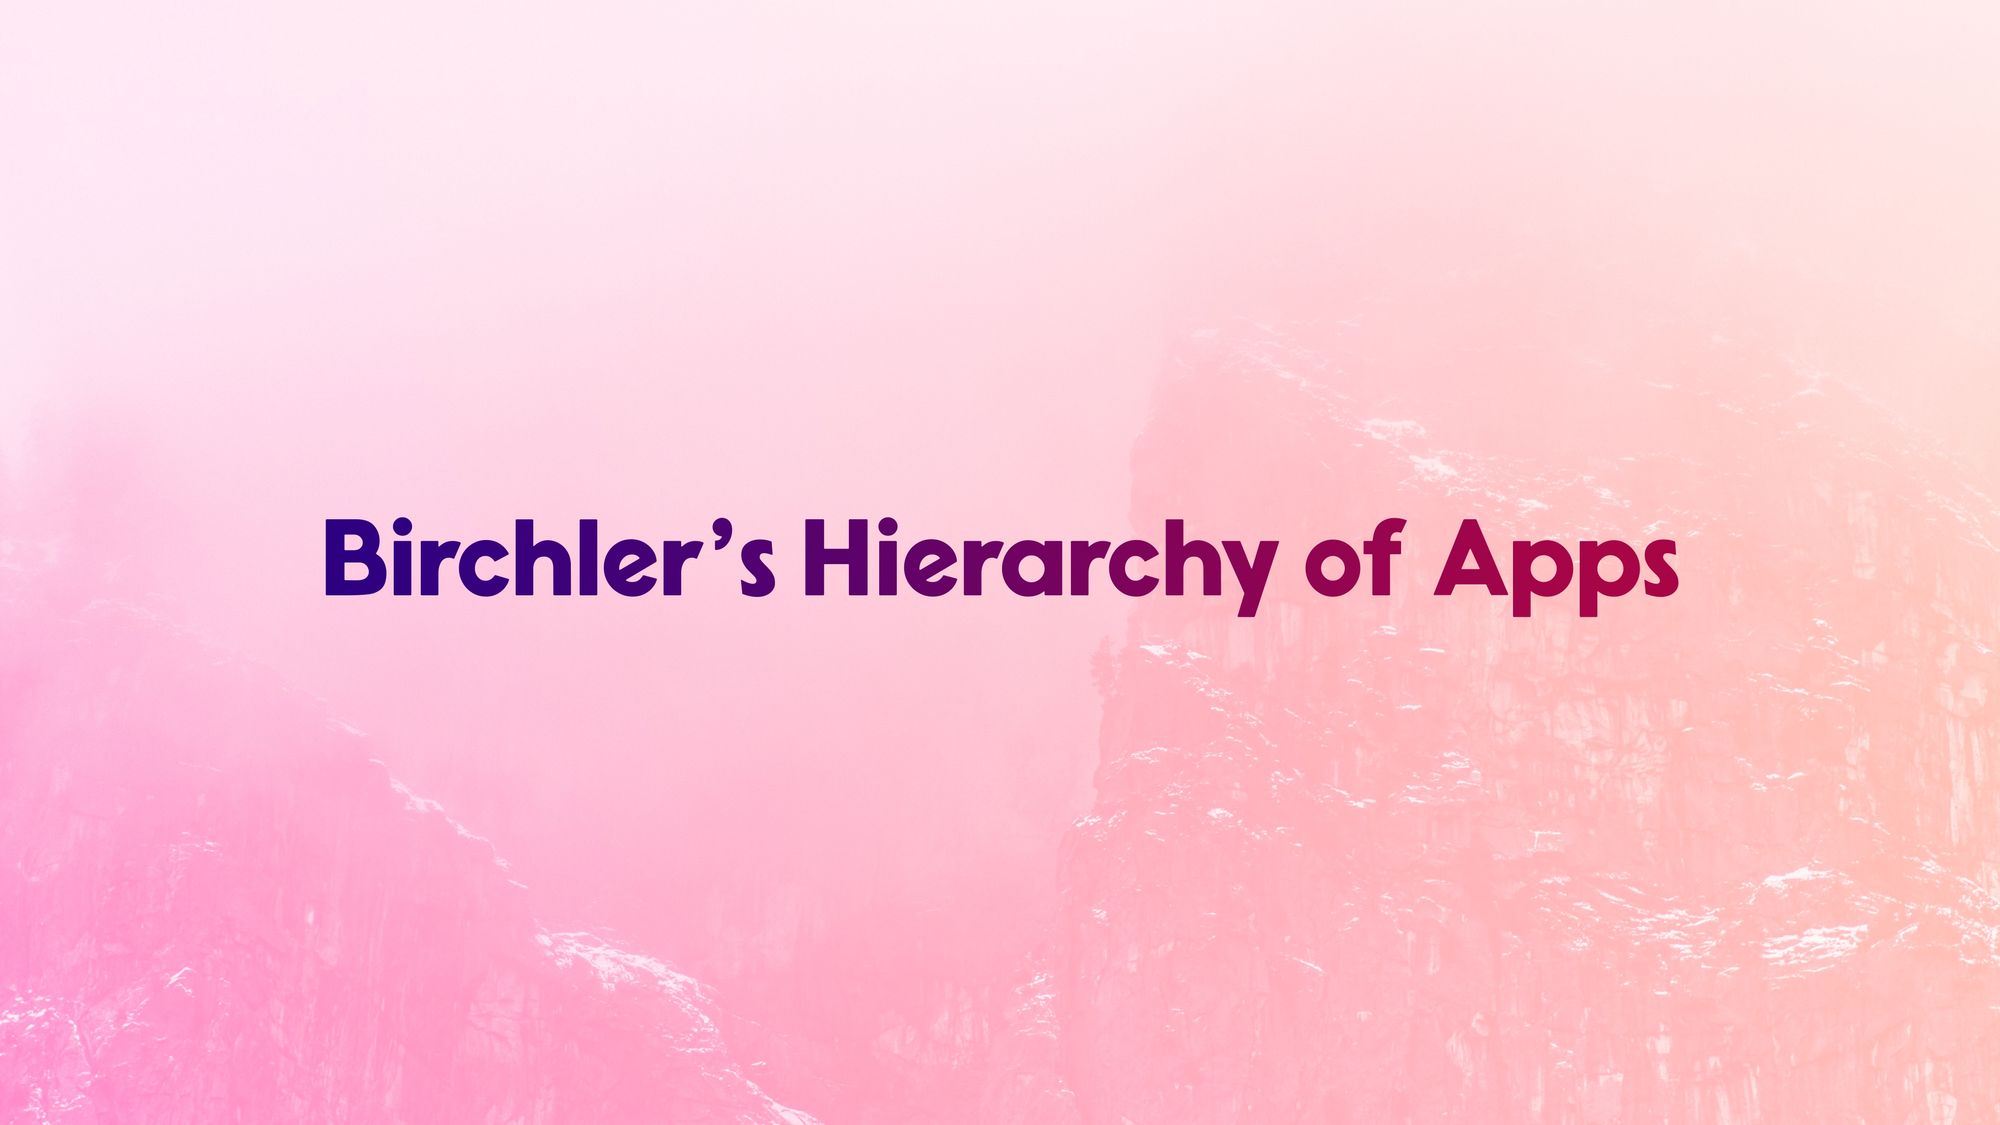 Birchler’s Hierarchy of Apps